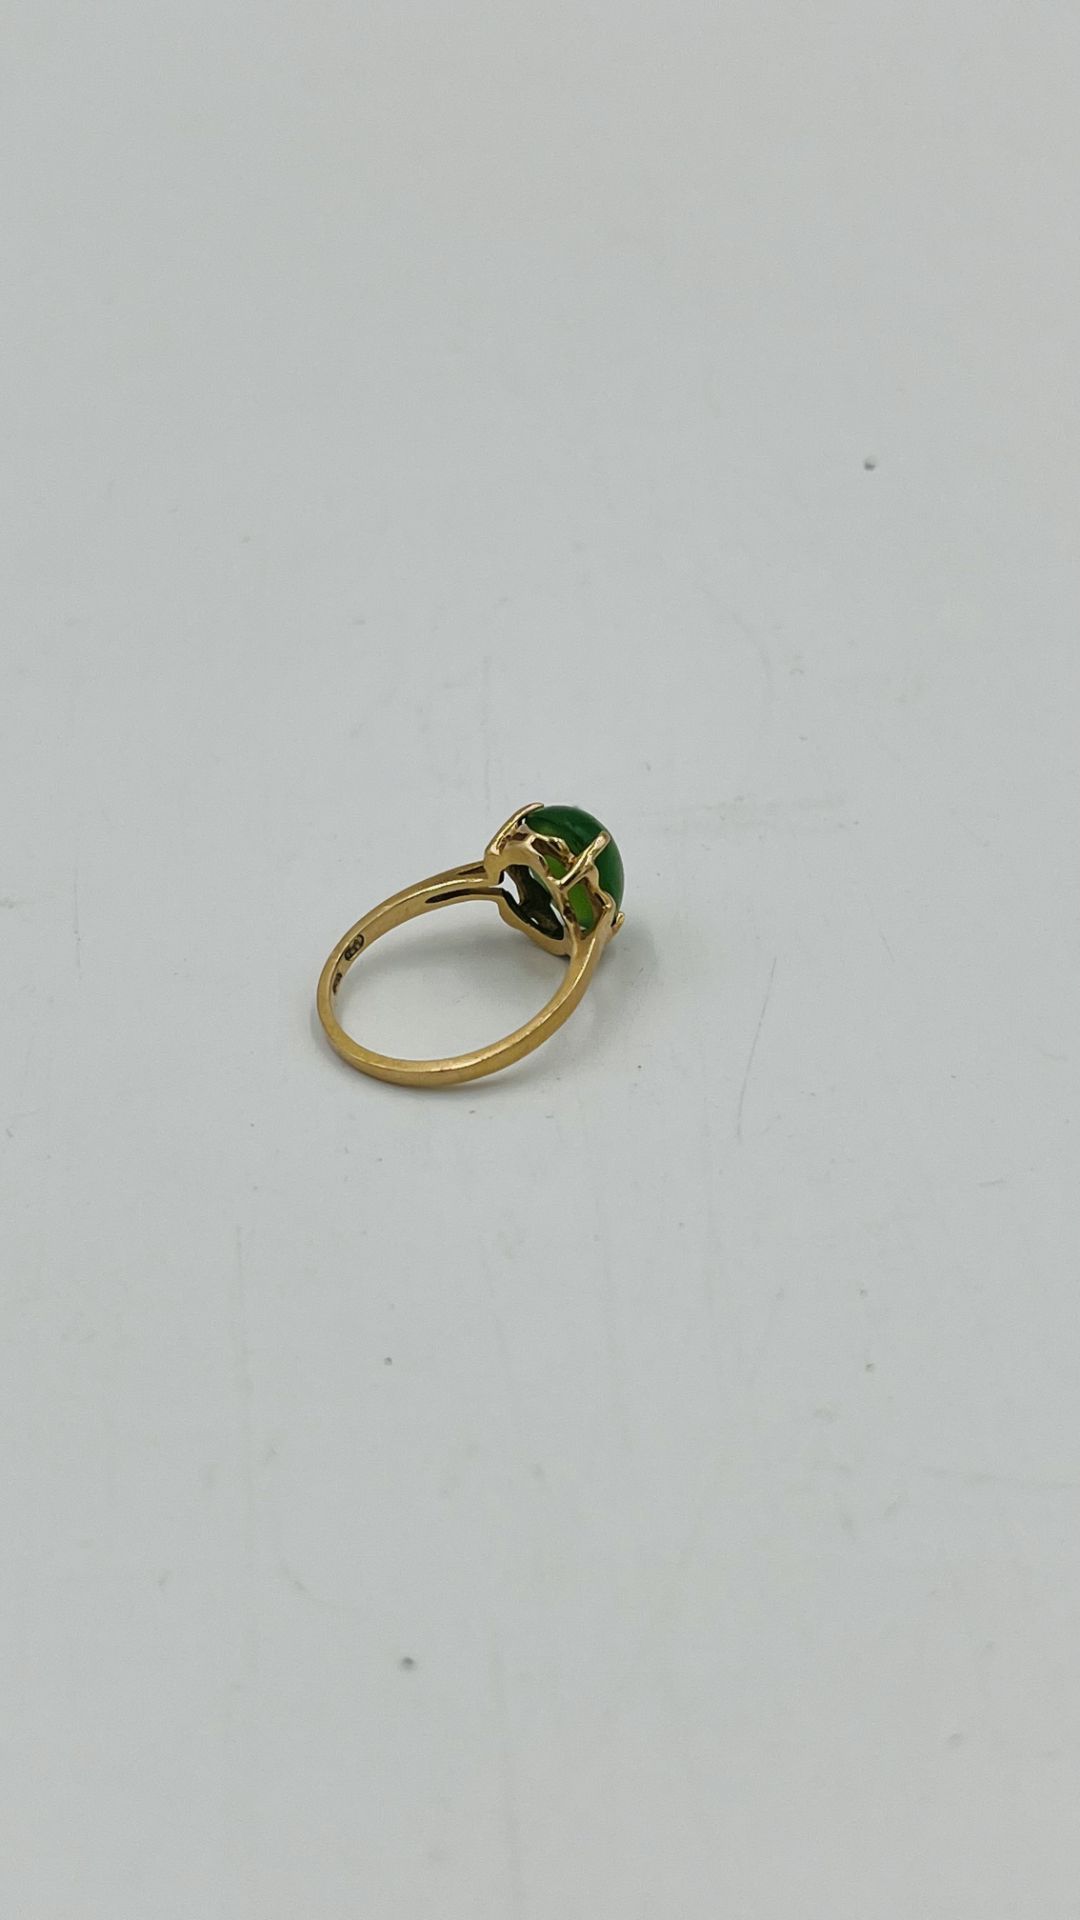 10ct gold ring set with a jade cabochon - Bild 4 aus 5